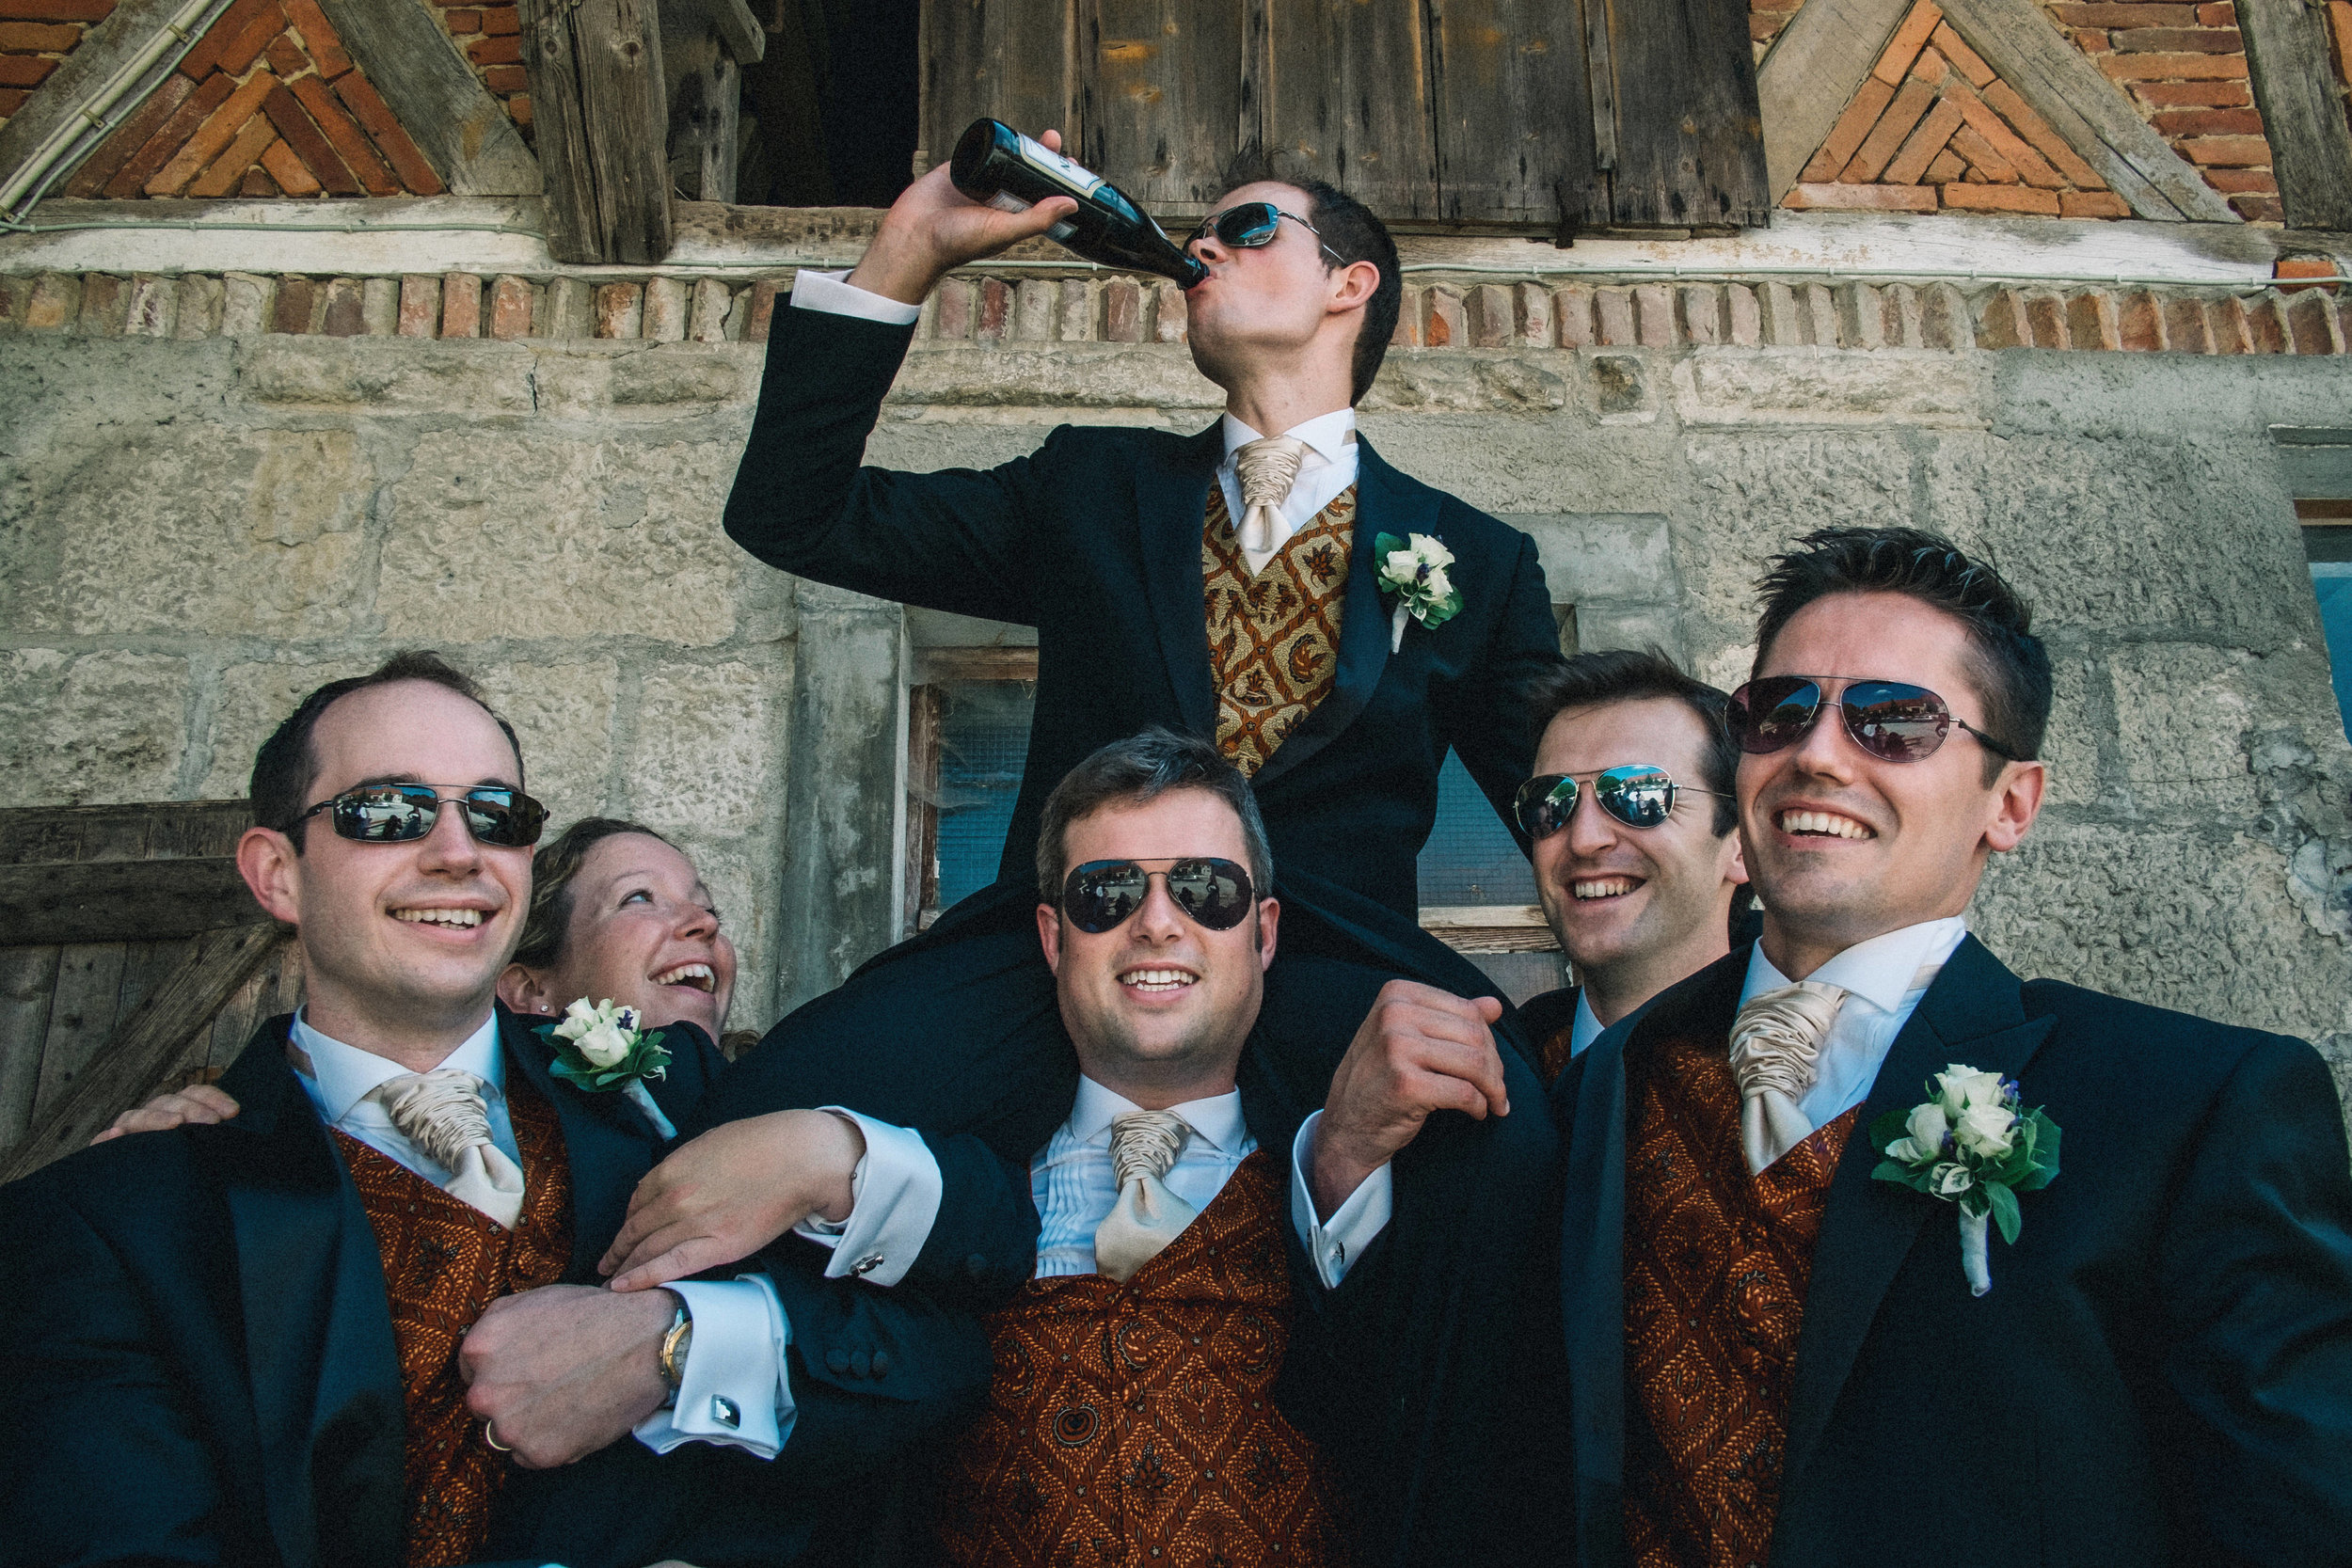  The groomsmen hold the groom on their shoulders The groomsmen hold the groom on their shoulders